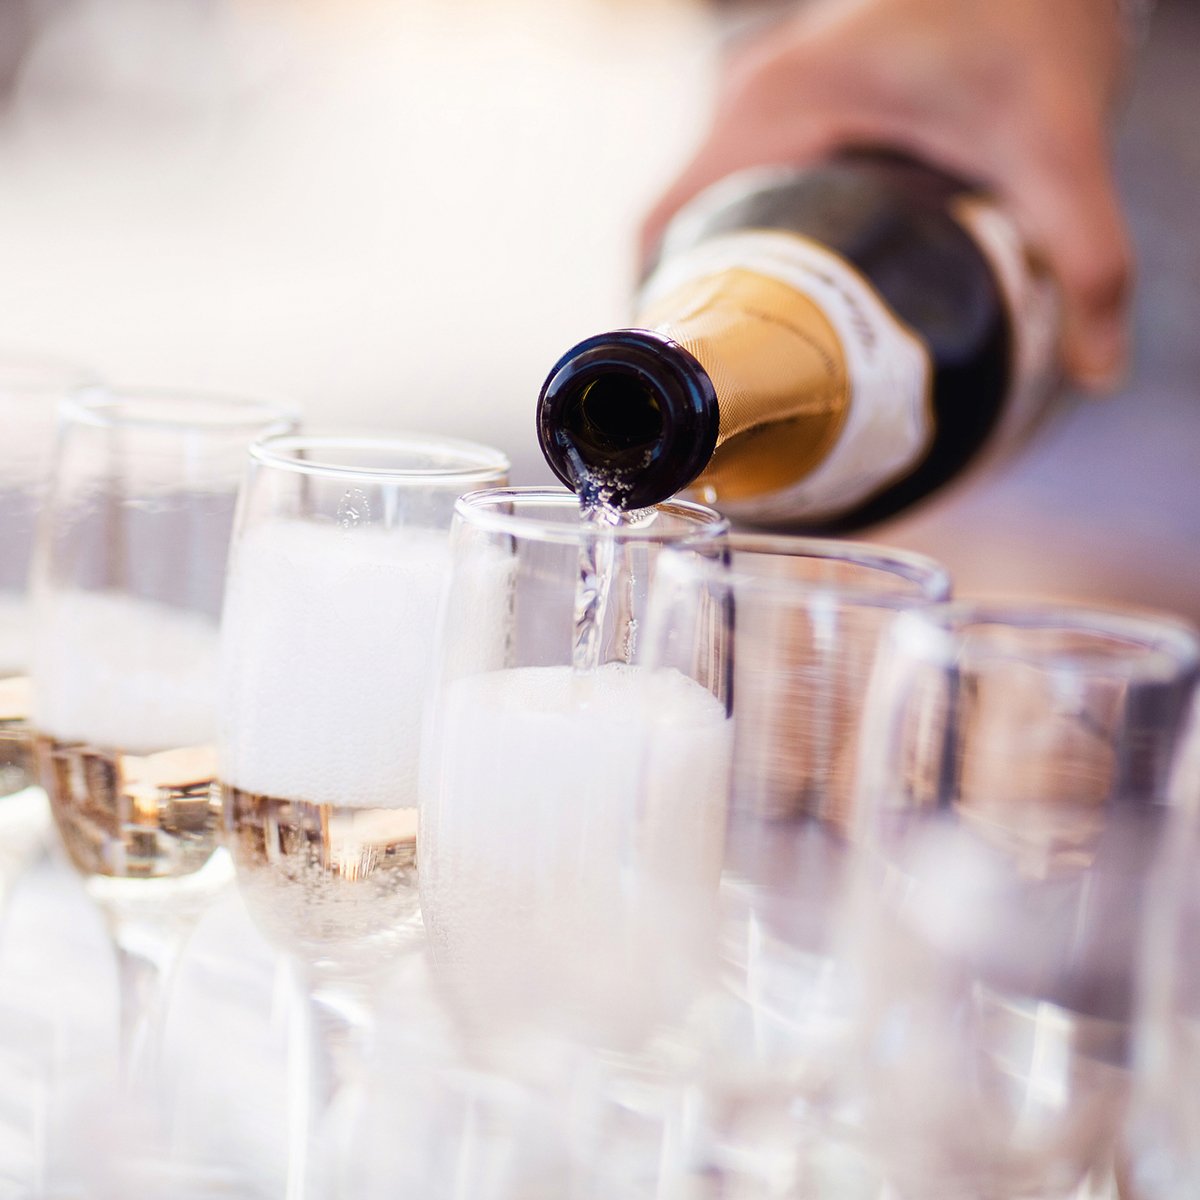 The world of sparkling wine is incredibly diverse and goes well beyond Prosecco and Champagne 🍾 Come learn the unique attributes of bubbly at our Sparkling Wine tasting on November 8th @ 7:00 p.m. >> ow.ly/wrcD30lfdzf